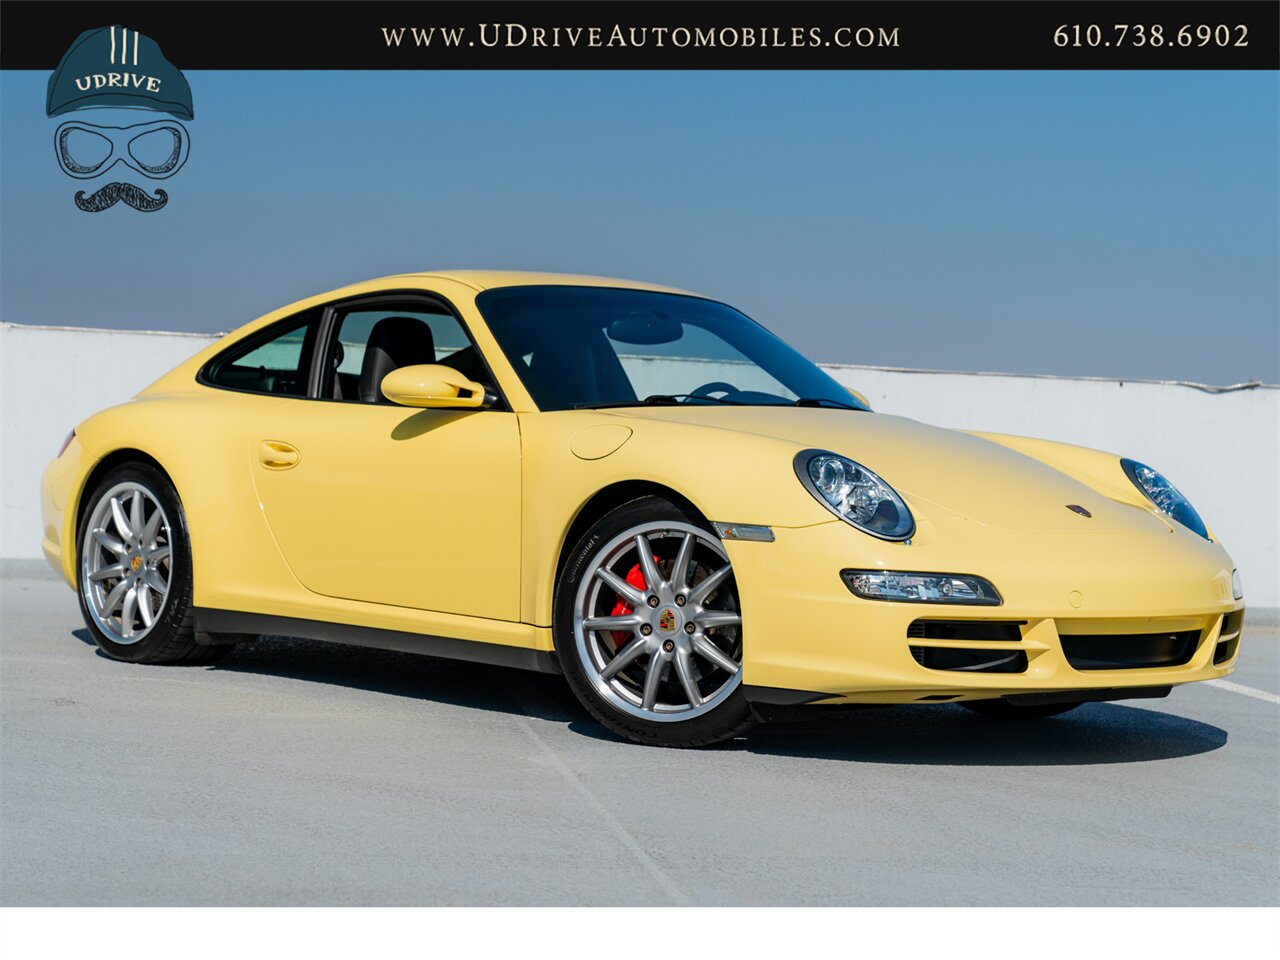 2007 Porsche 911 Carrera 4S 997 C4S Paint To Sample Pastel Yellow  6 Speed Sport Chrono Full Leather Yellow Gauges - Photo 4 - West Chester, PA 19382